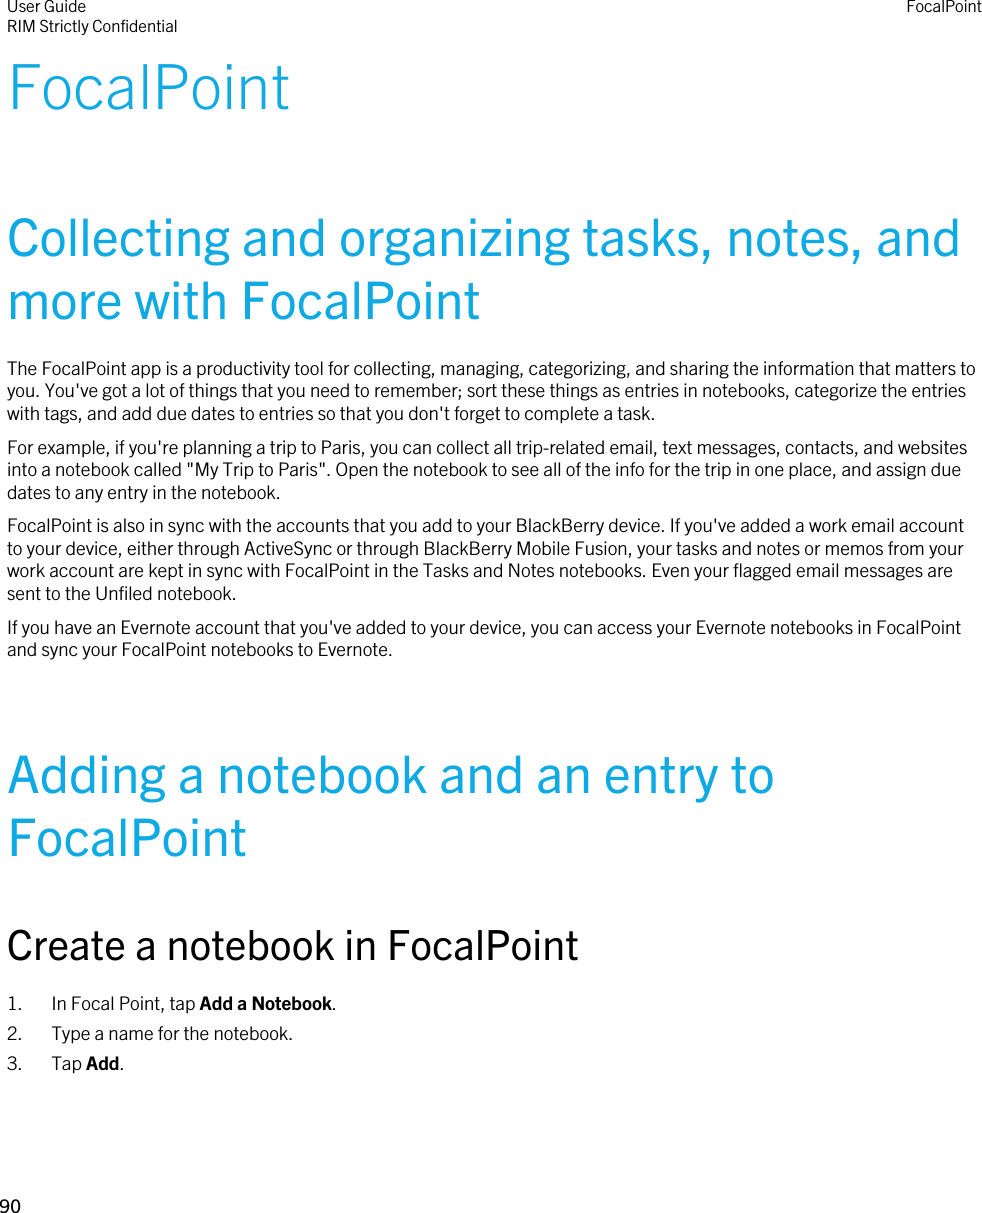 FocalPointCollecting and organizing tasks, notes, and more with FocalPointThe FocalPoint app is a productivity tool for collecting, managing, categorizing, and sharing the information that matters to you. You&apos;ve got a lot of things that you need to remember; sort these things as entries in notebooks, categorize the entries with tags, and add due dates to entries so that you don&apos;t forget to complete a task.For example, if you&apos;re planning a trip to Paris, you can collect all trip-related email, text messages, contacts, and websites into a notebook called &quot;My Trip to Paris&quot;. Open the notebook to see all of the info for the trip in one place, and assign due dates to any entry in the notebook.FocalPoint is also in sync with the accounts that you add to your BlackBerry device. If you&apos;ve added a work email account to your device, either through ActiveSync or through BlackBerry Mobile Fusion, your tasks and notes or memos from your work account are kept in sync with FocalPoint in the Tasks and Notes notebooks. Even your flagged email messages are sent to the Unfiled notebook.If you have an Evernote account that you&apos;ve added to your device, you can access your Evernote notebooks in FocalPoint and sync your FocalPoint notebooks to Evernote.Adding a notebook and an entry to FocalPointCreate a notebook in FocalPoint1. In Focal Point, tap Add a Notebook.2. Type a name for the notebook.3. Tap Add.User GuideRIM Strictly ConfidentialFocalPoint90 